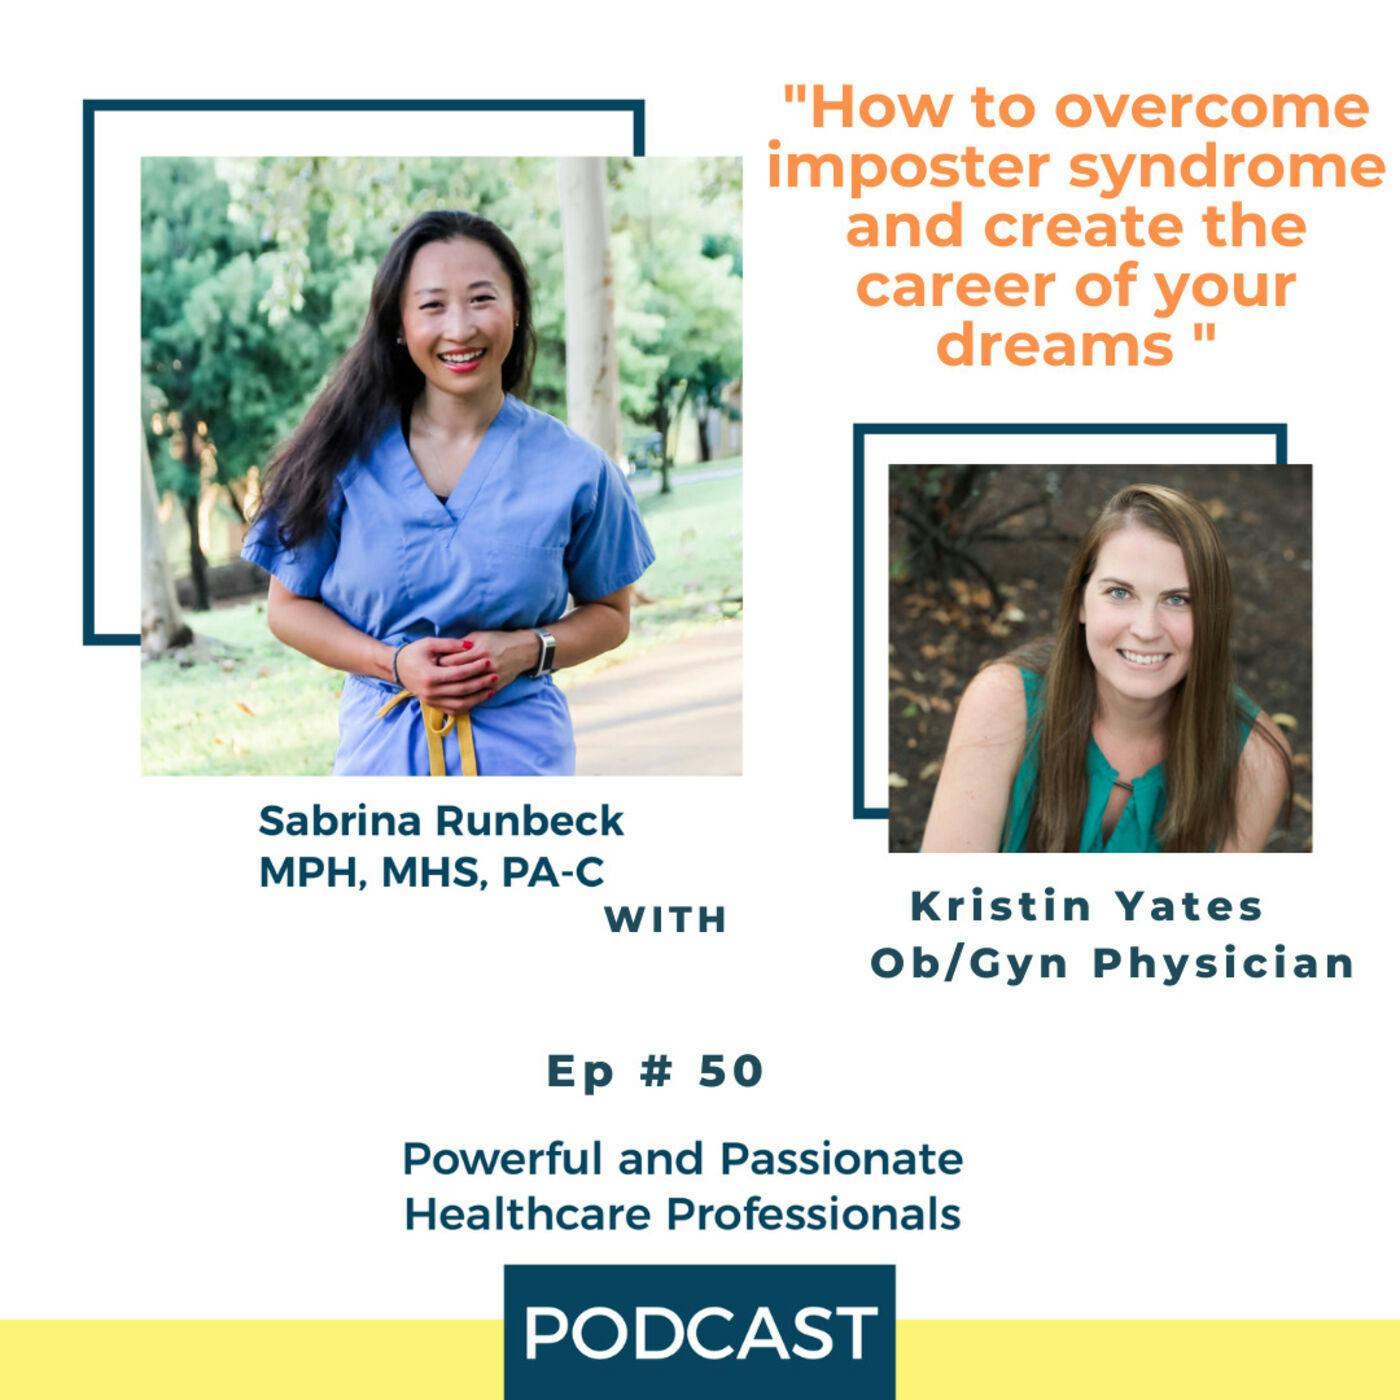 Ep 50 – How to Overcome Imposter Syndrome and Create the Career of Your Dreams with Kristin Yates